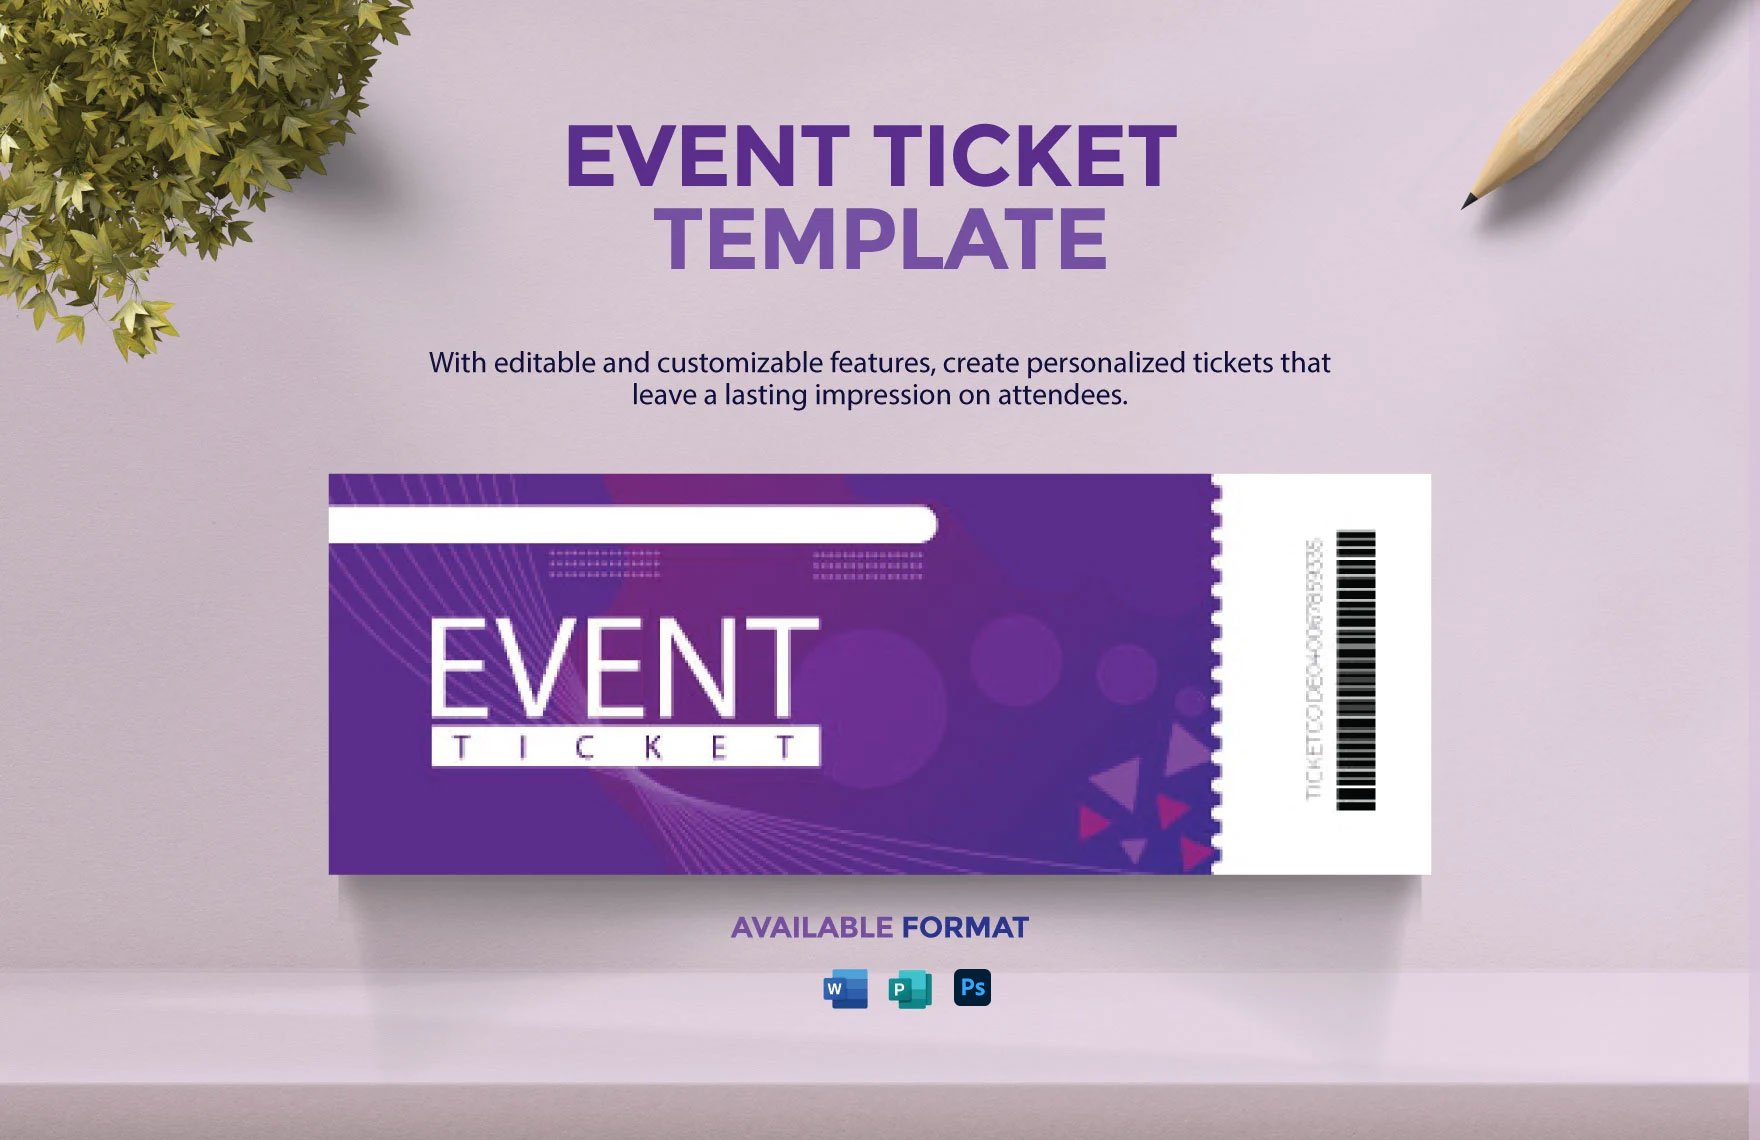 Event Ticket Template in Word, PSD, Publisher